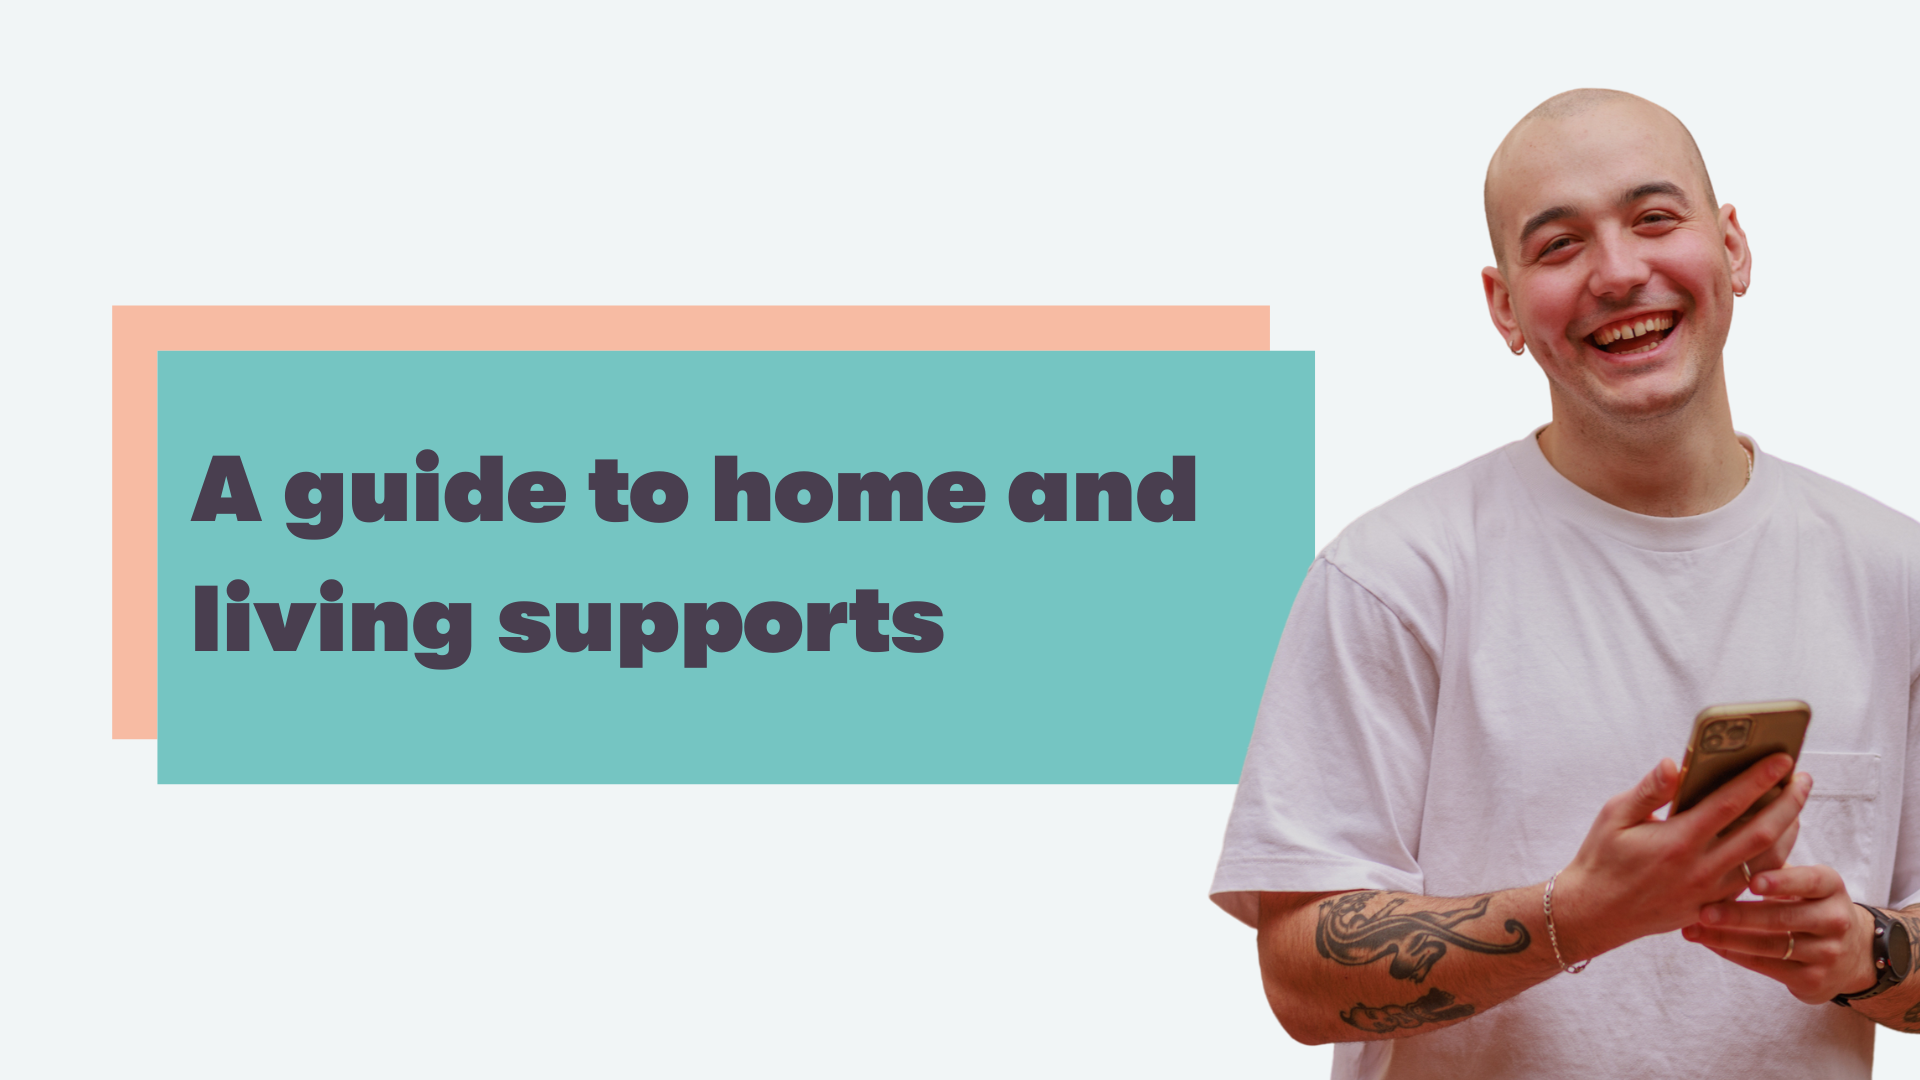 Text in centre reads: A guide to home and living supports. A man with a shaved head wearing a white tshirt smiles broadly looking at the camera to the right of the text.